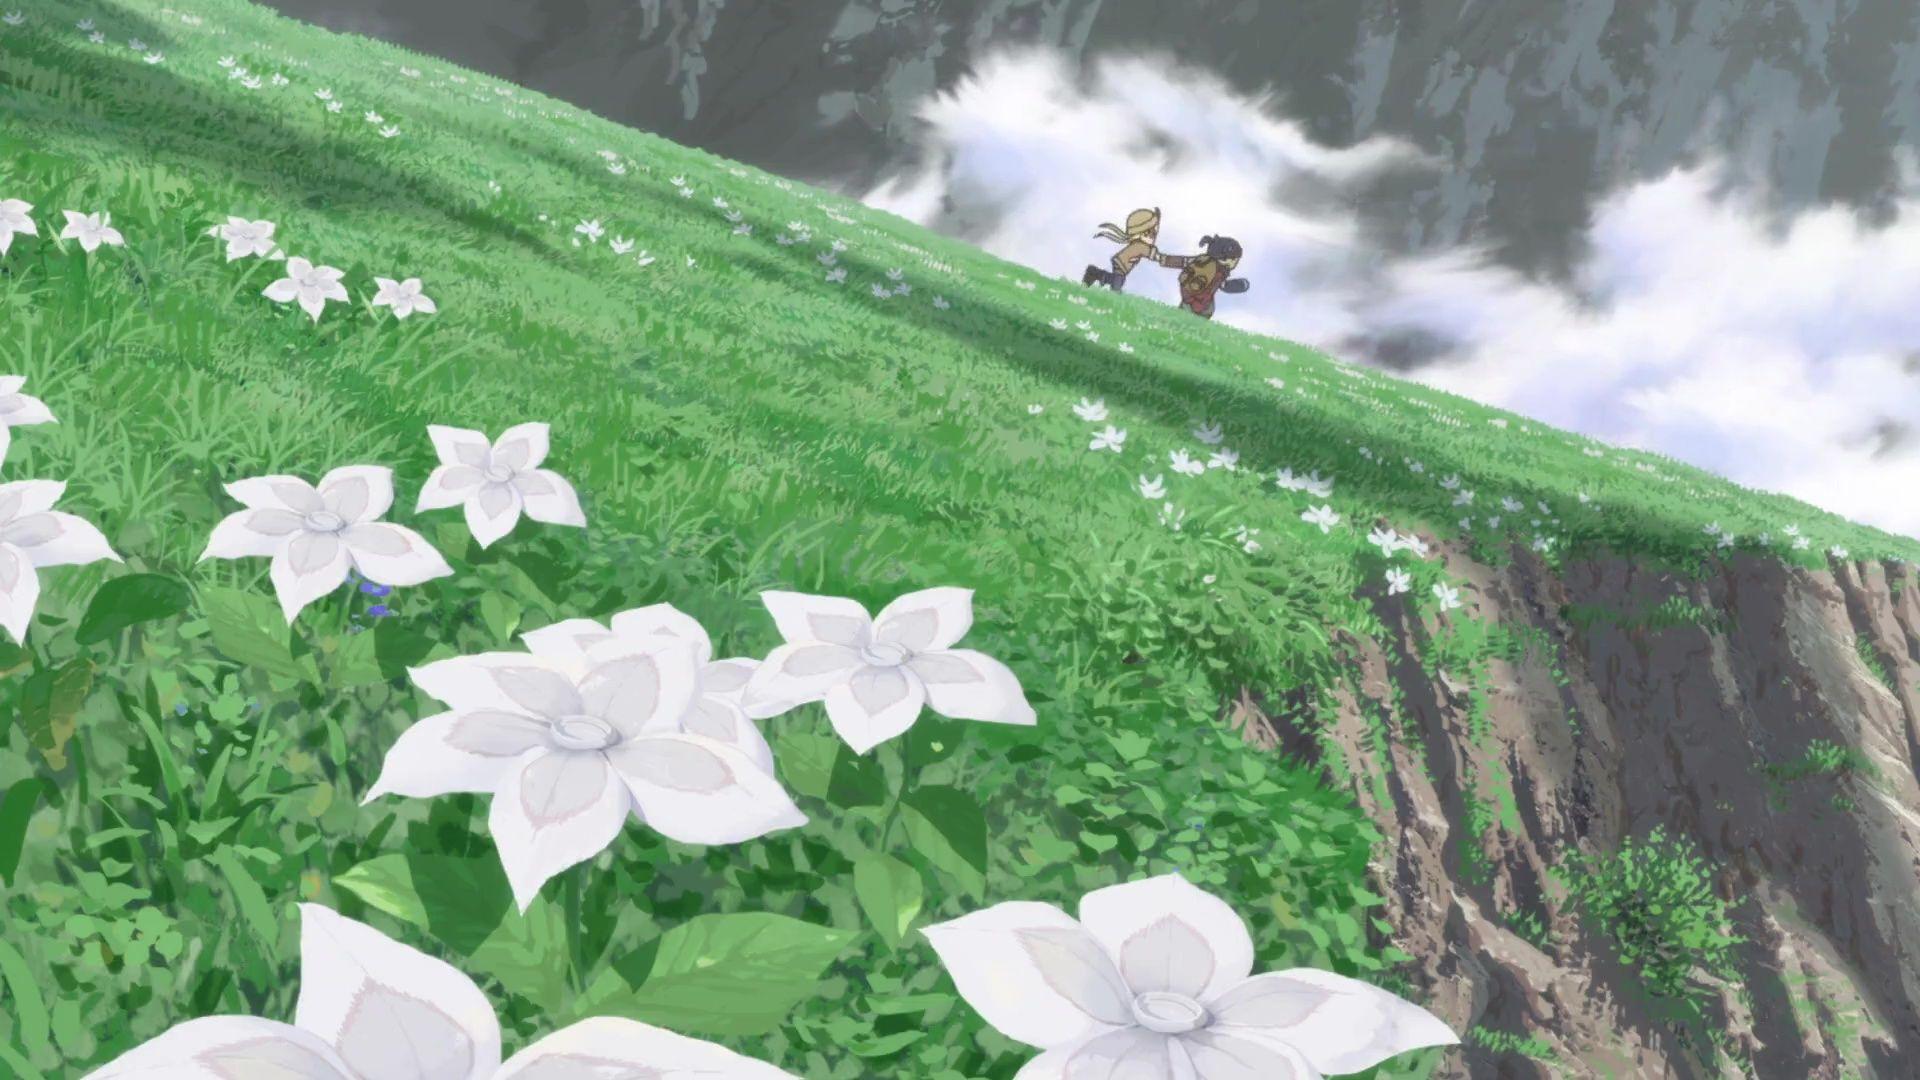 General 1920x1080 Made in Abyss anime field flowers plants outdoors